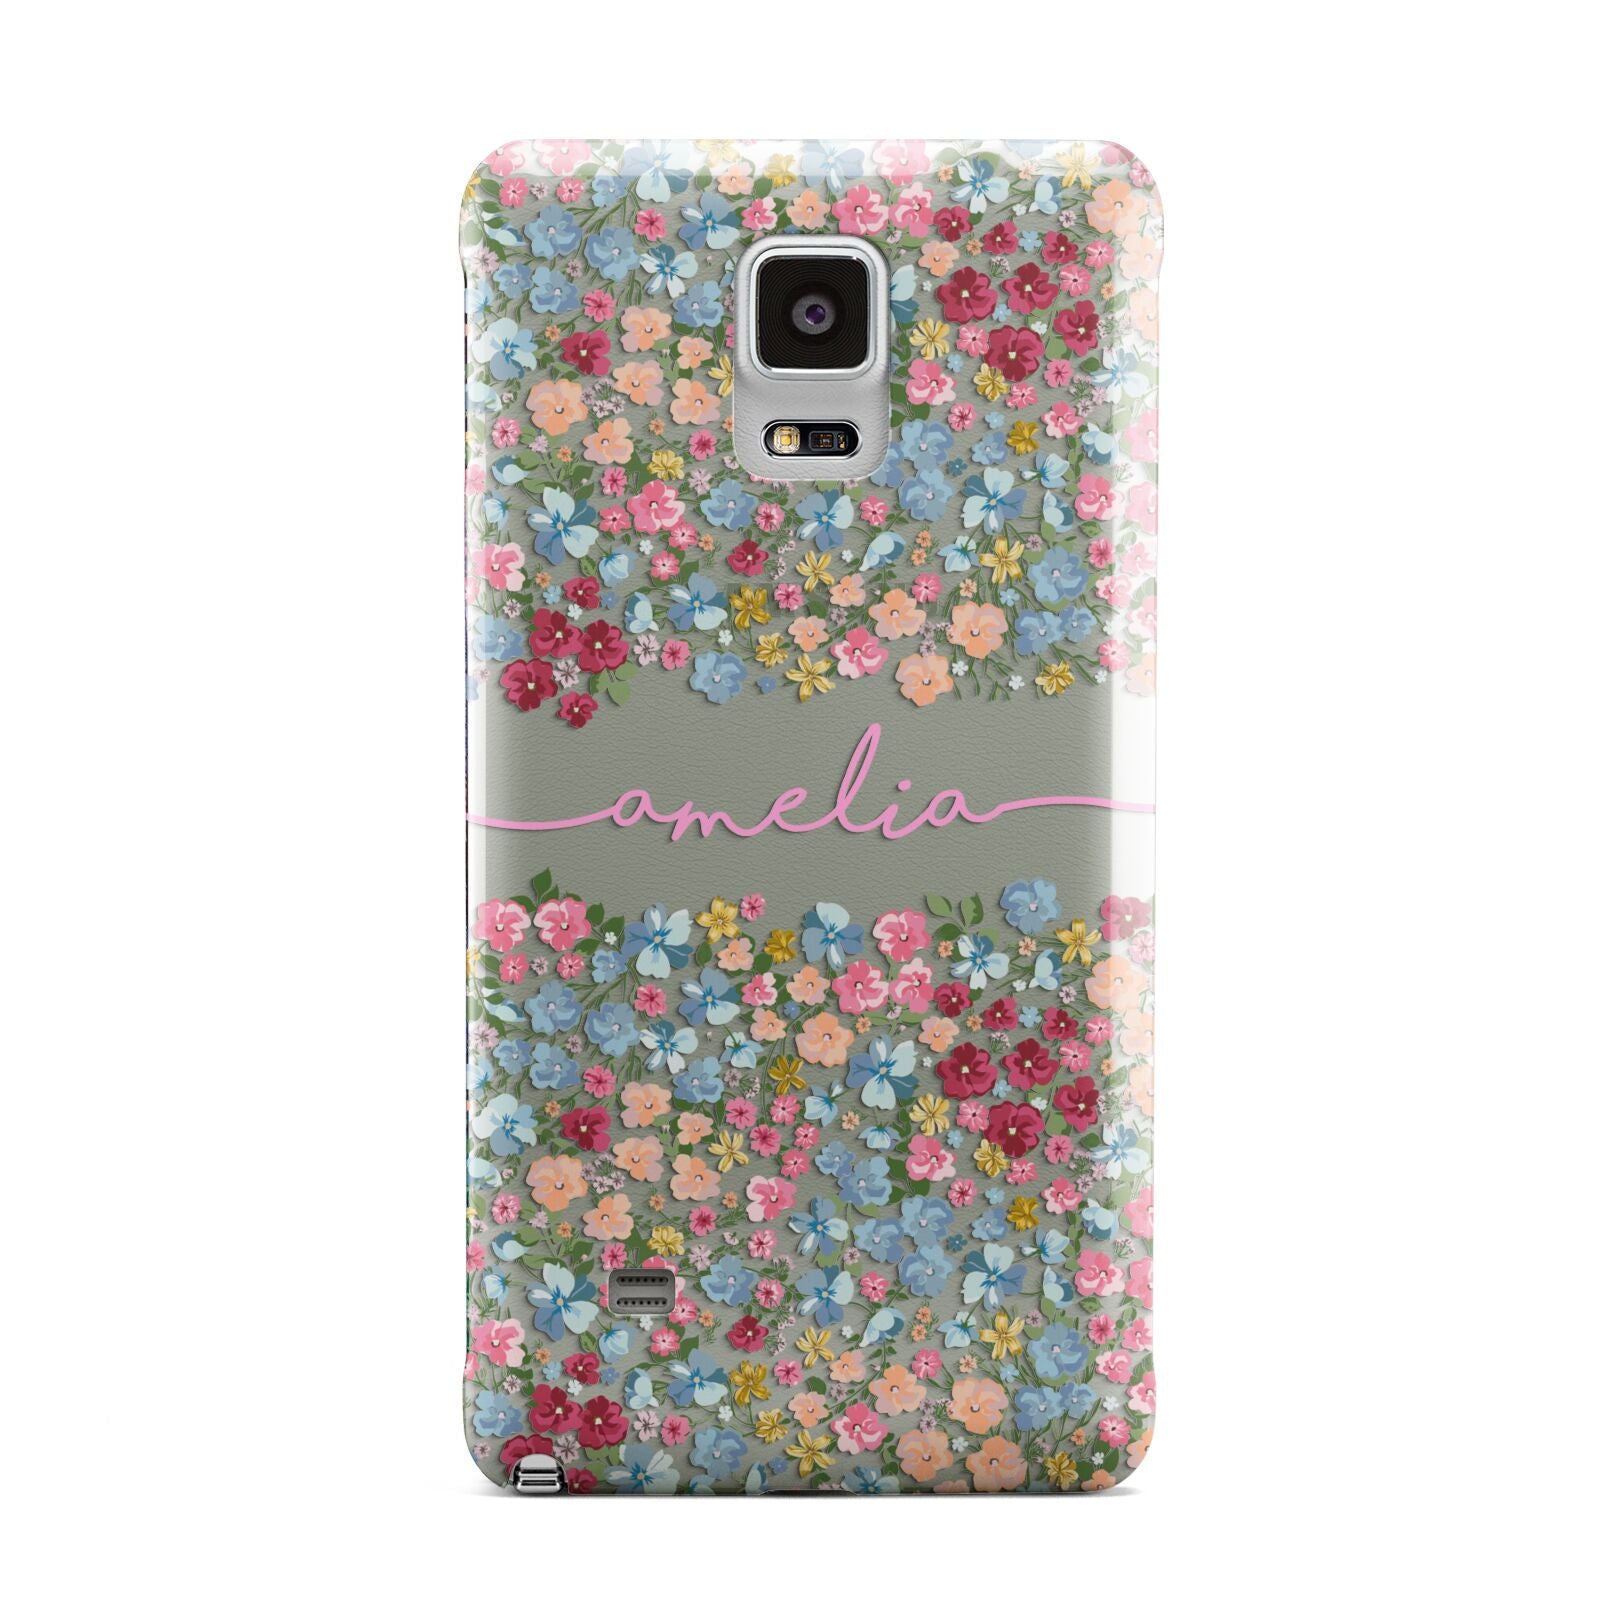 Personalised Floral Meadow Samsung Galaxy Note 4 Case